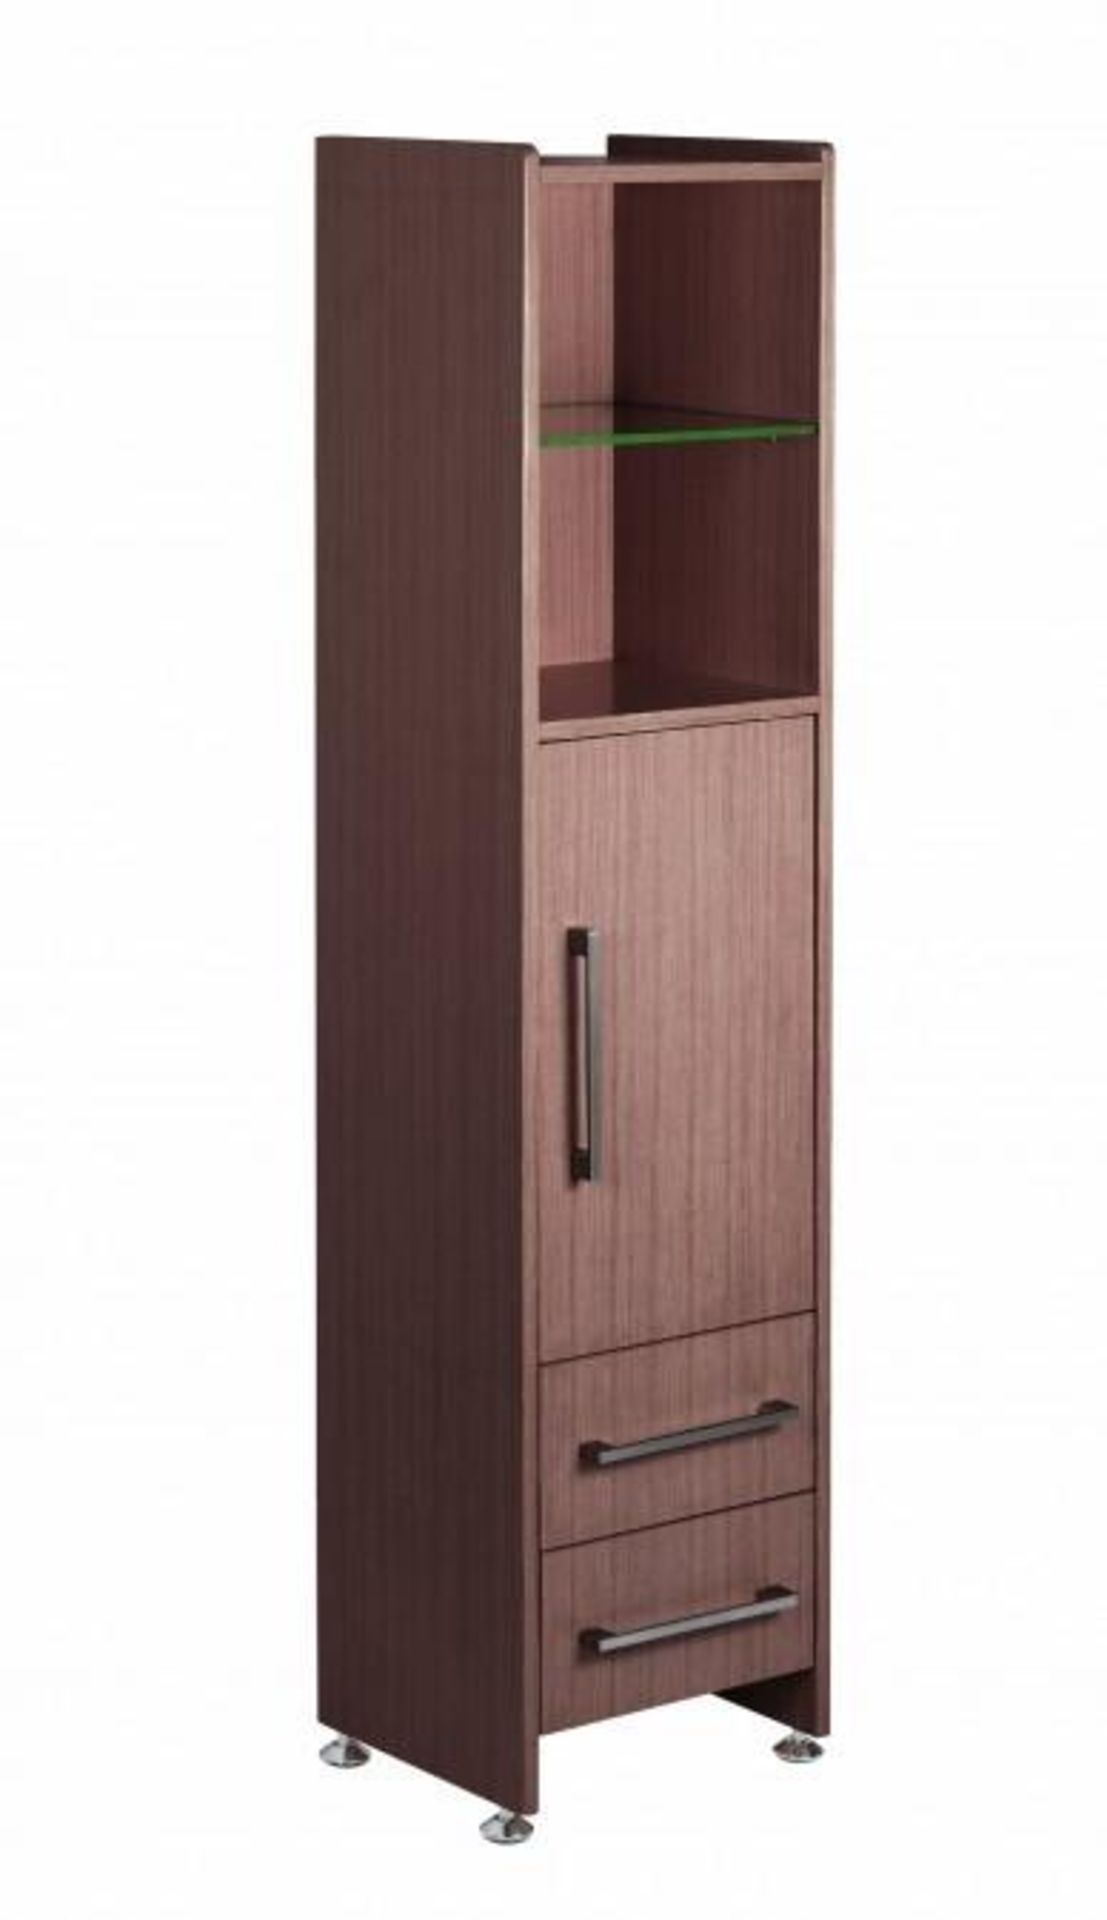 1 x Vogue ARC Series 2 Upright TALL BOY Bathroom Cabinet - WENGE FINISH - Manufactured to the Highes